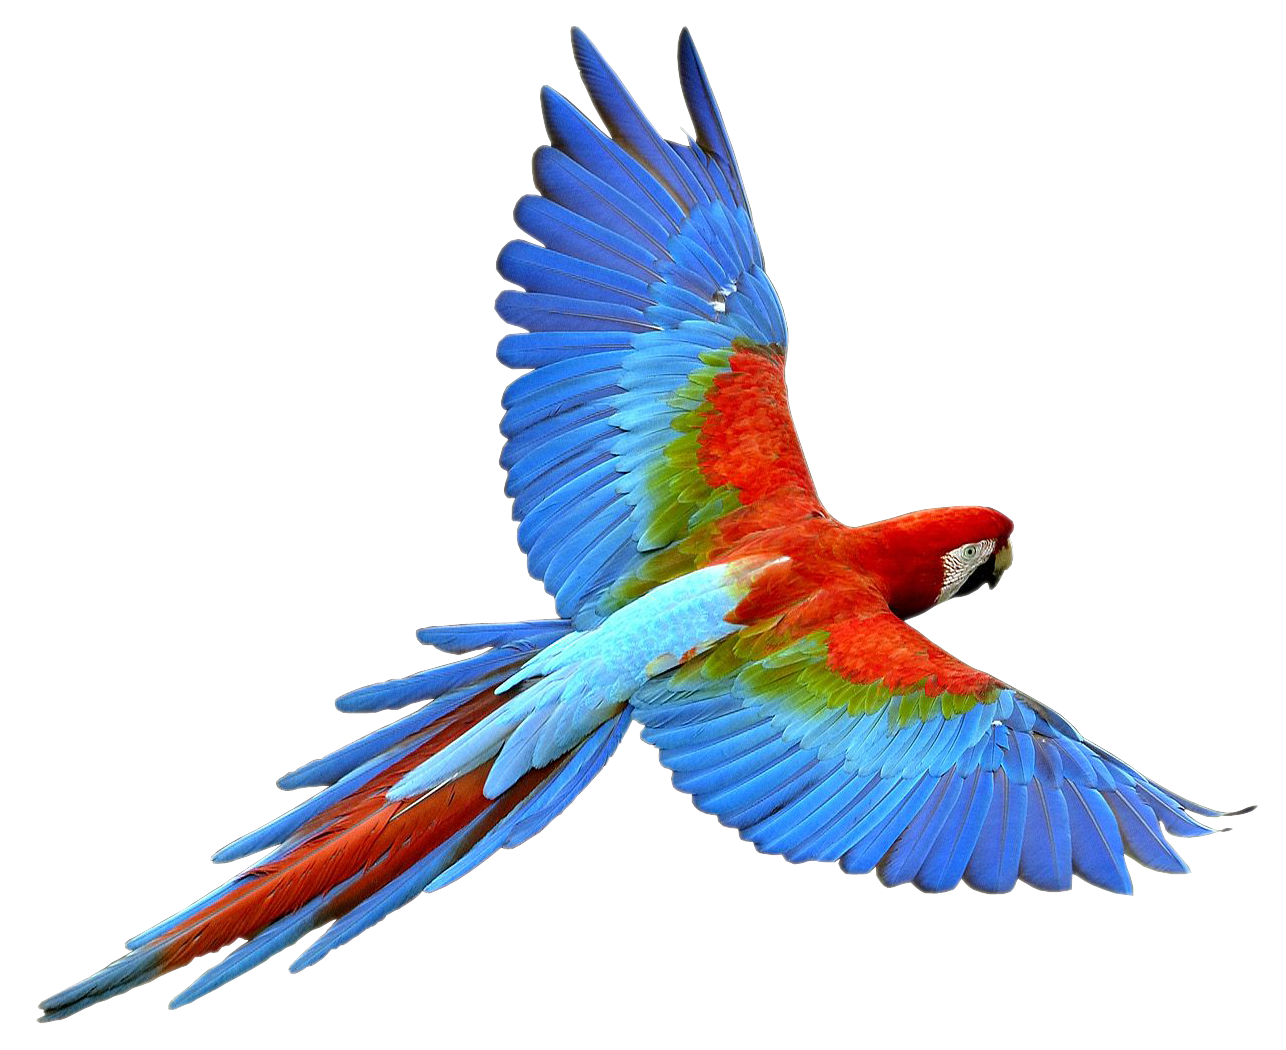 Green Parrot Png Images Downl